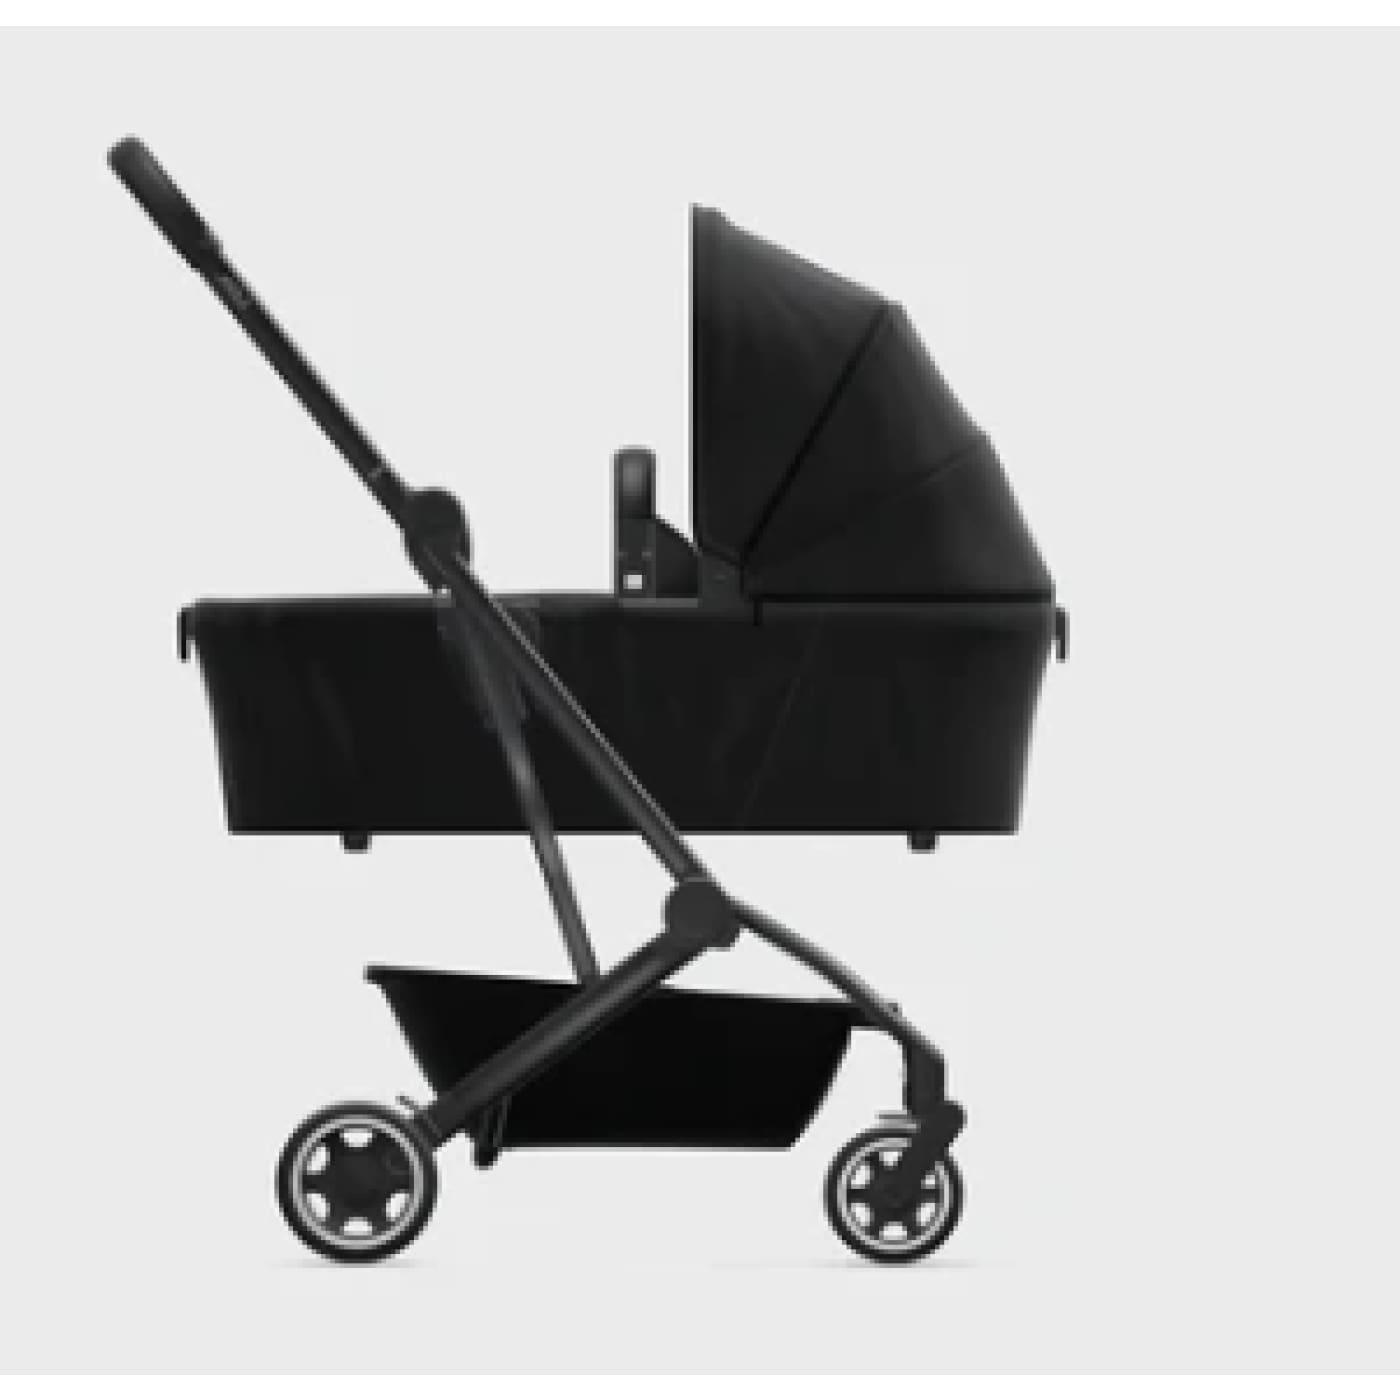 Joolz AER+ Carry Cot - Refined Black - Refined Black - PRAMS & STROLLERS - BASS/CARRY COTS/STANDS